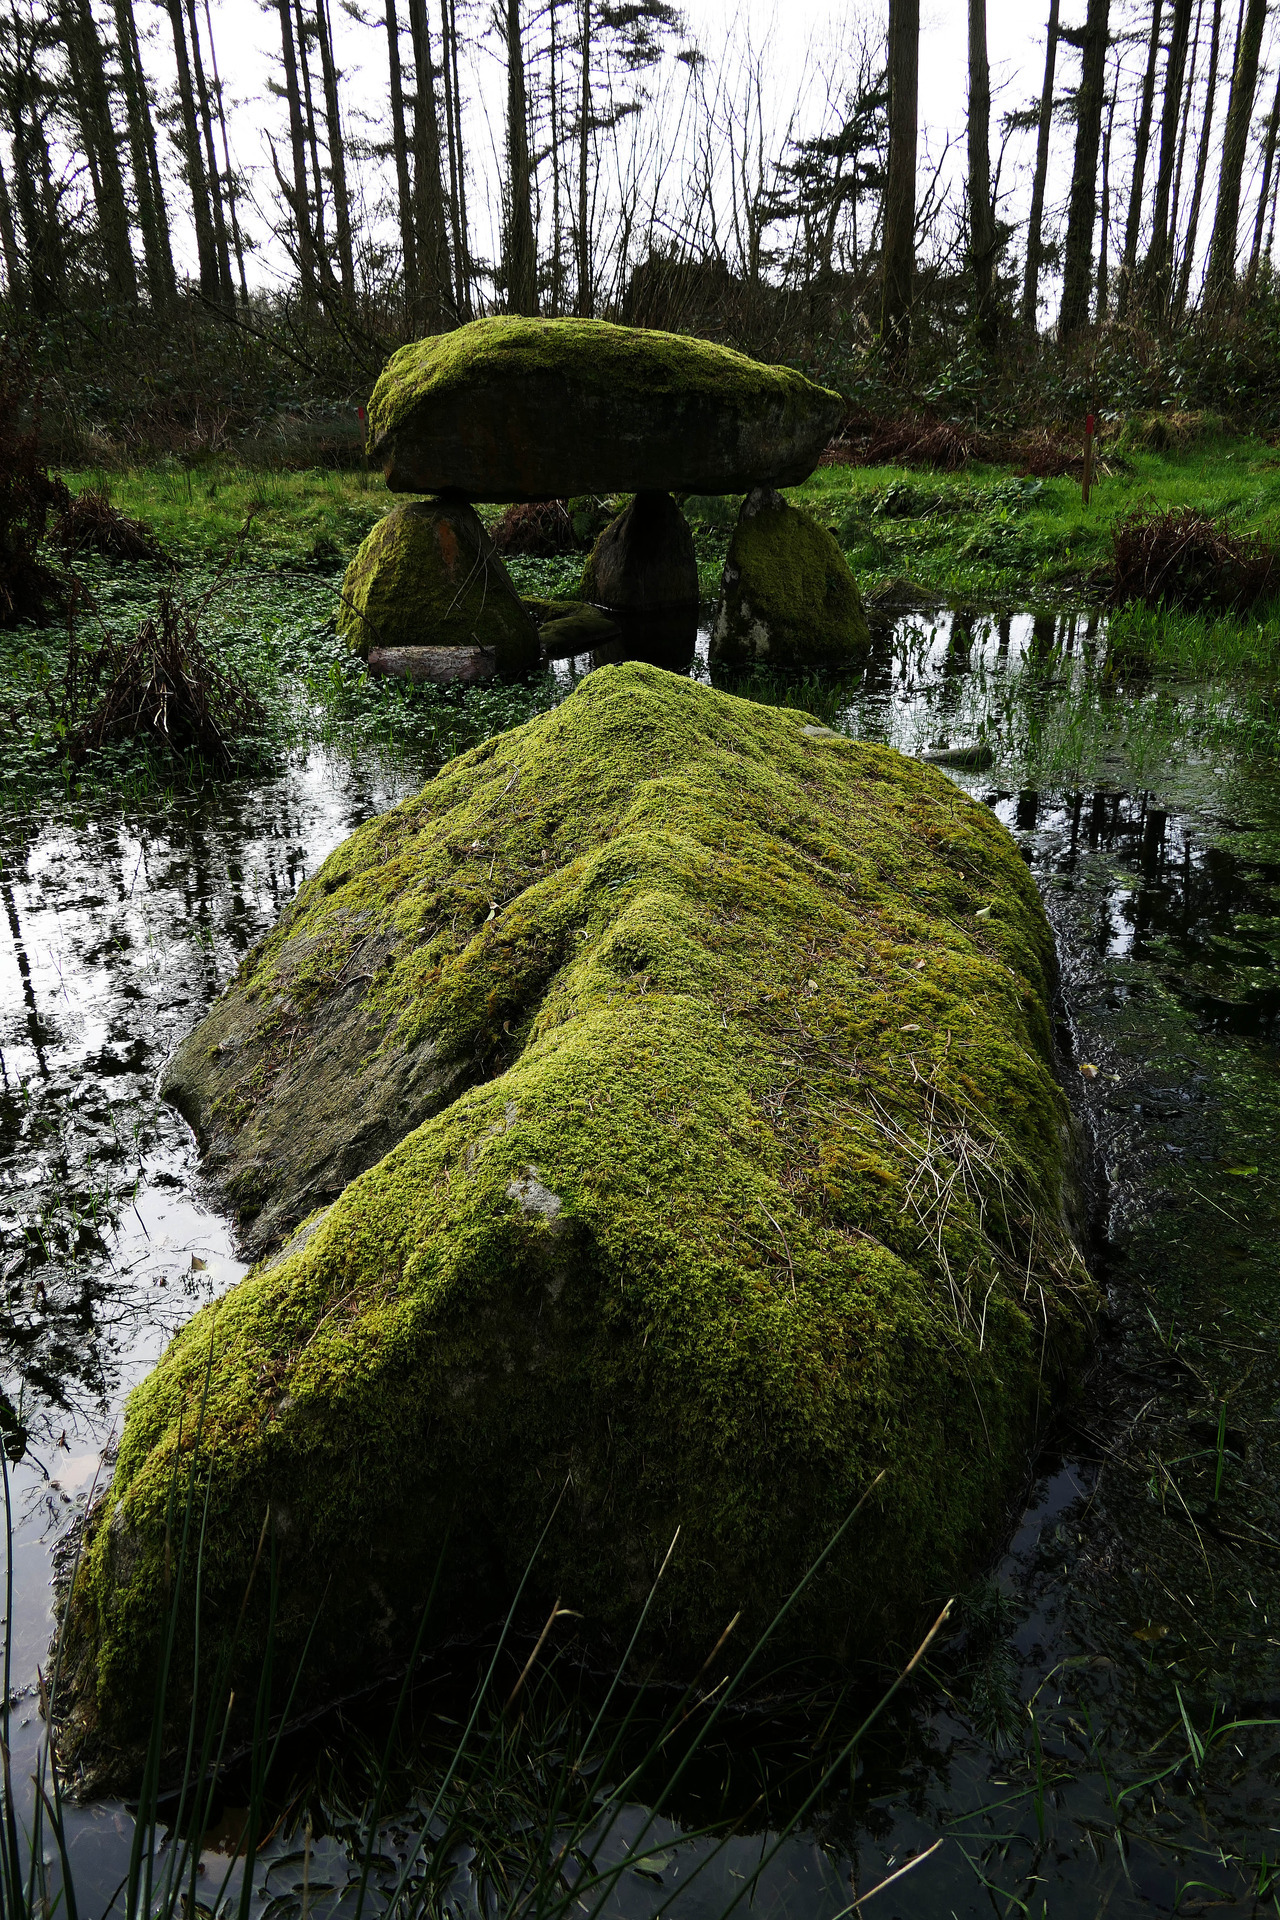 thesilicontribesman: Flooded Cromlech at Parc Glynllifon, North Wales, 16.2.18. It